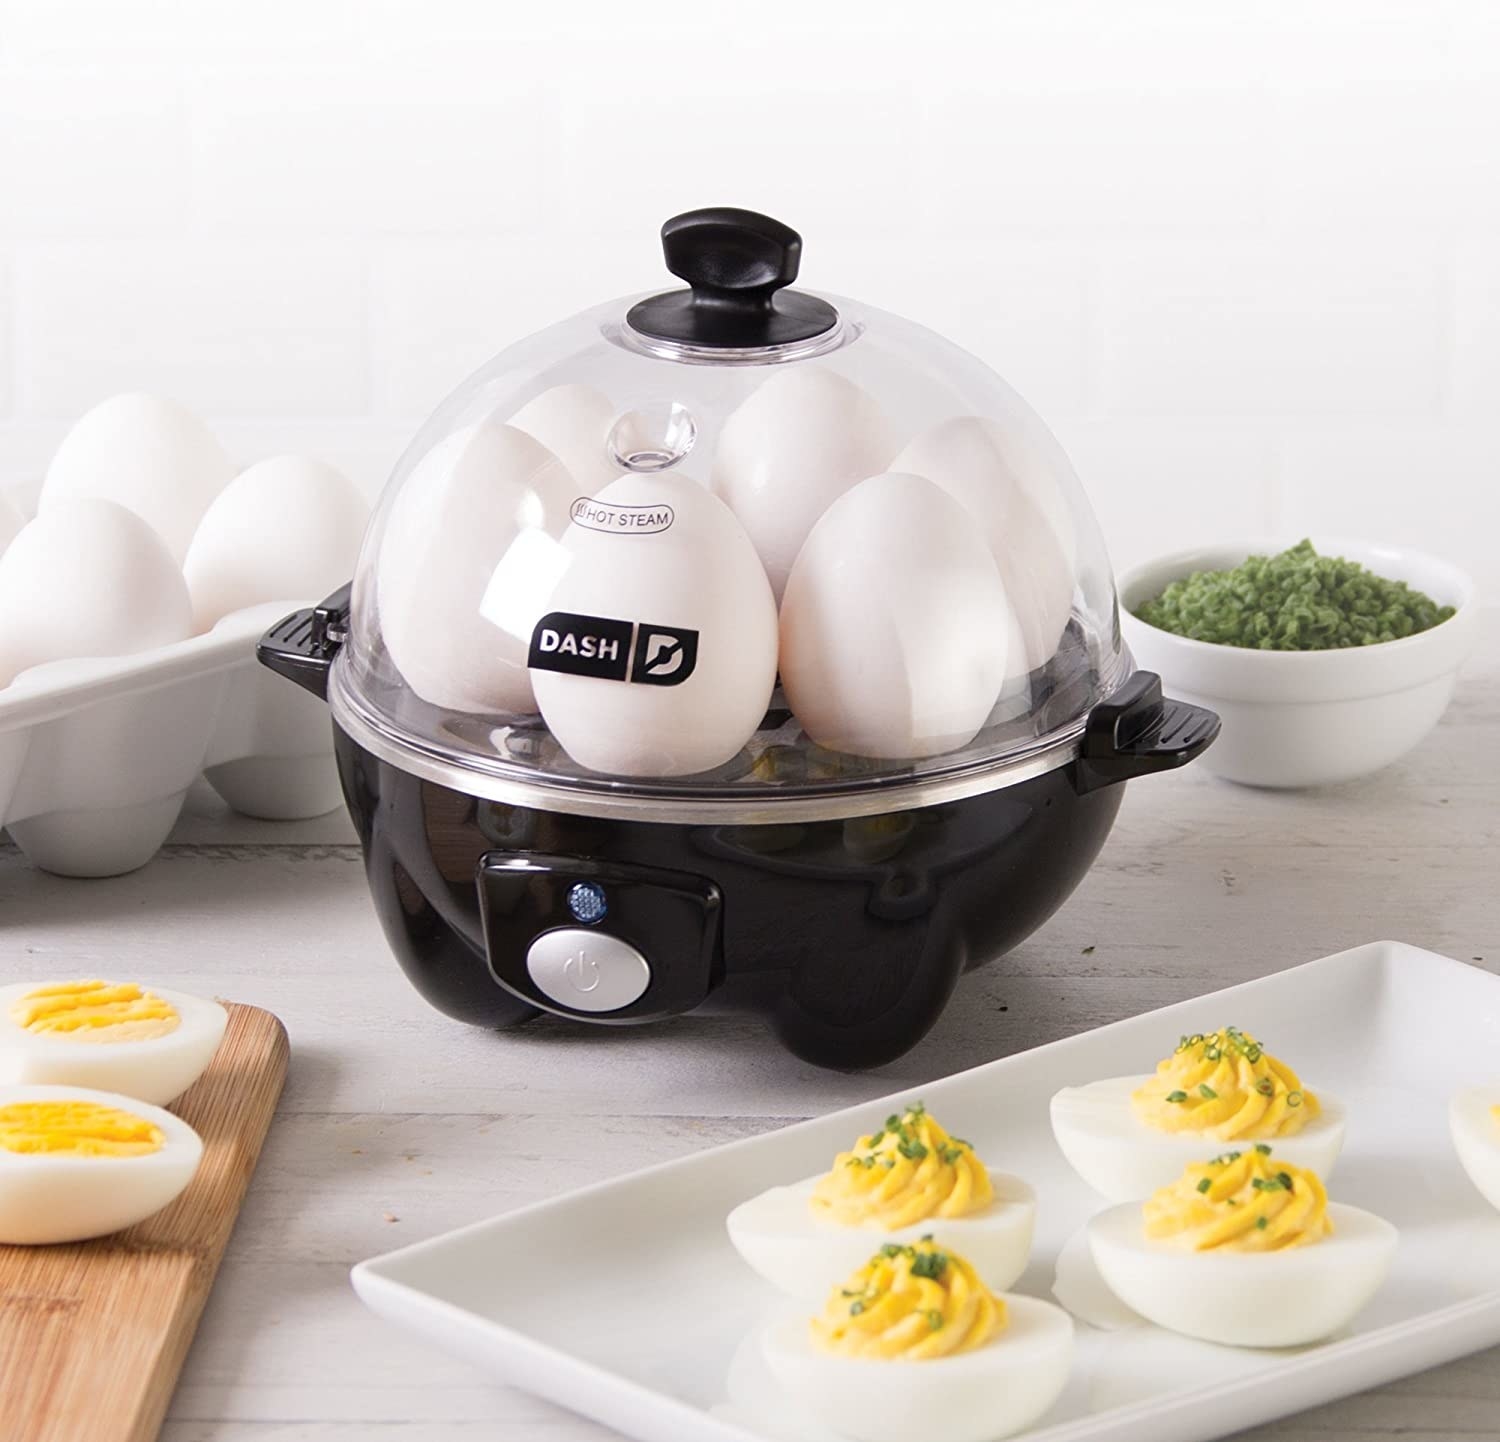 The Dash egg cooker makes hard boiled eggs with plates of finished, halved hard boiled eggs next to it